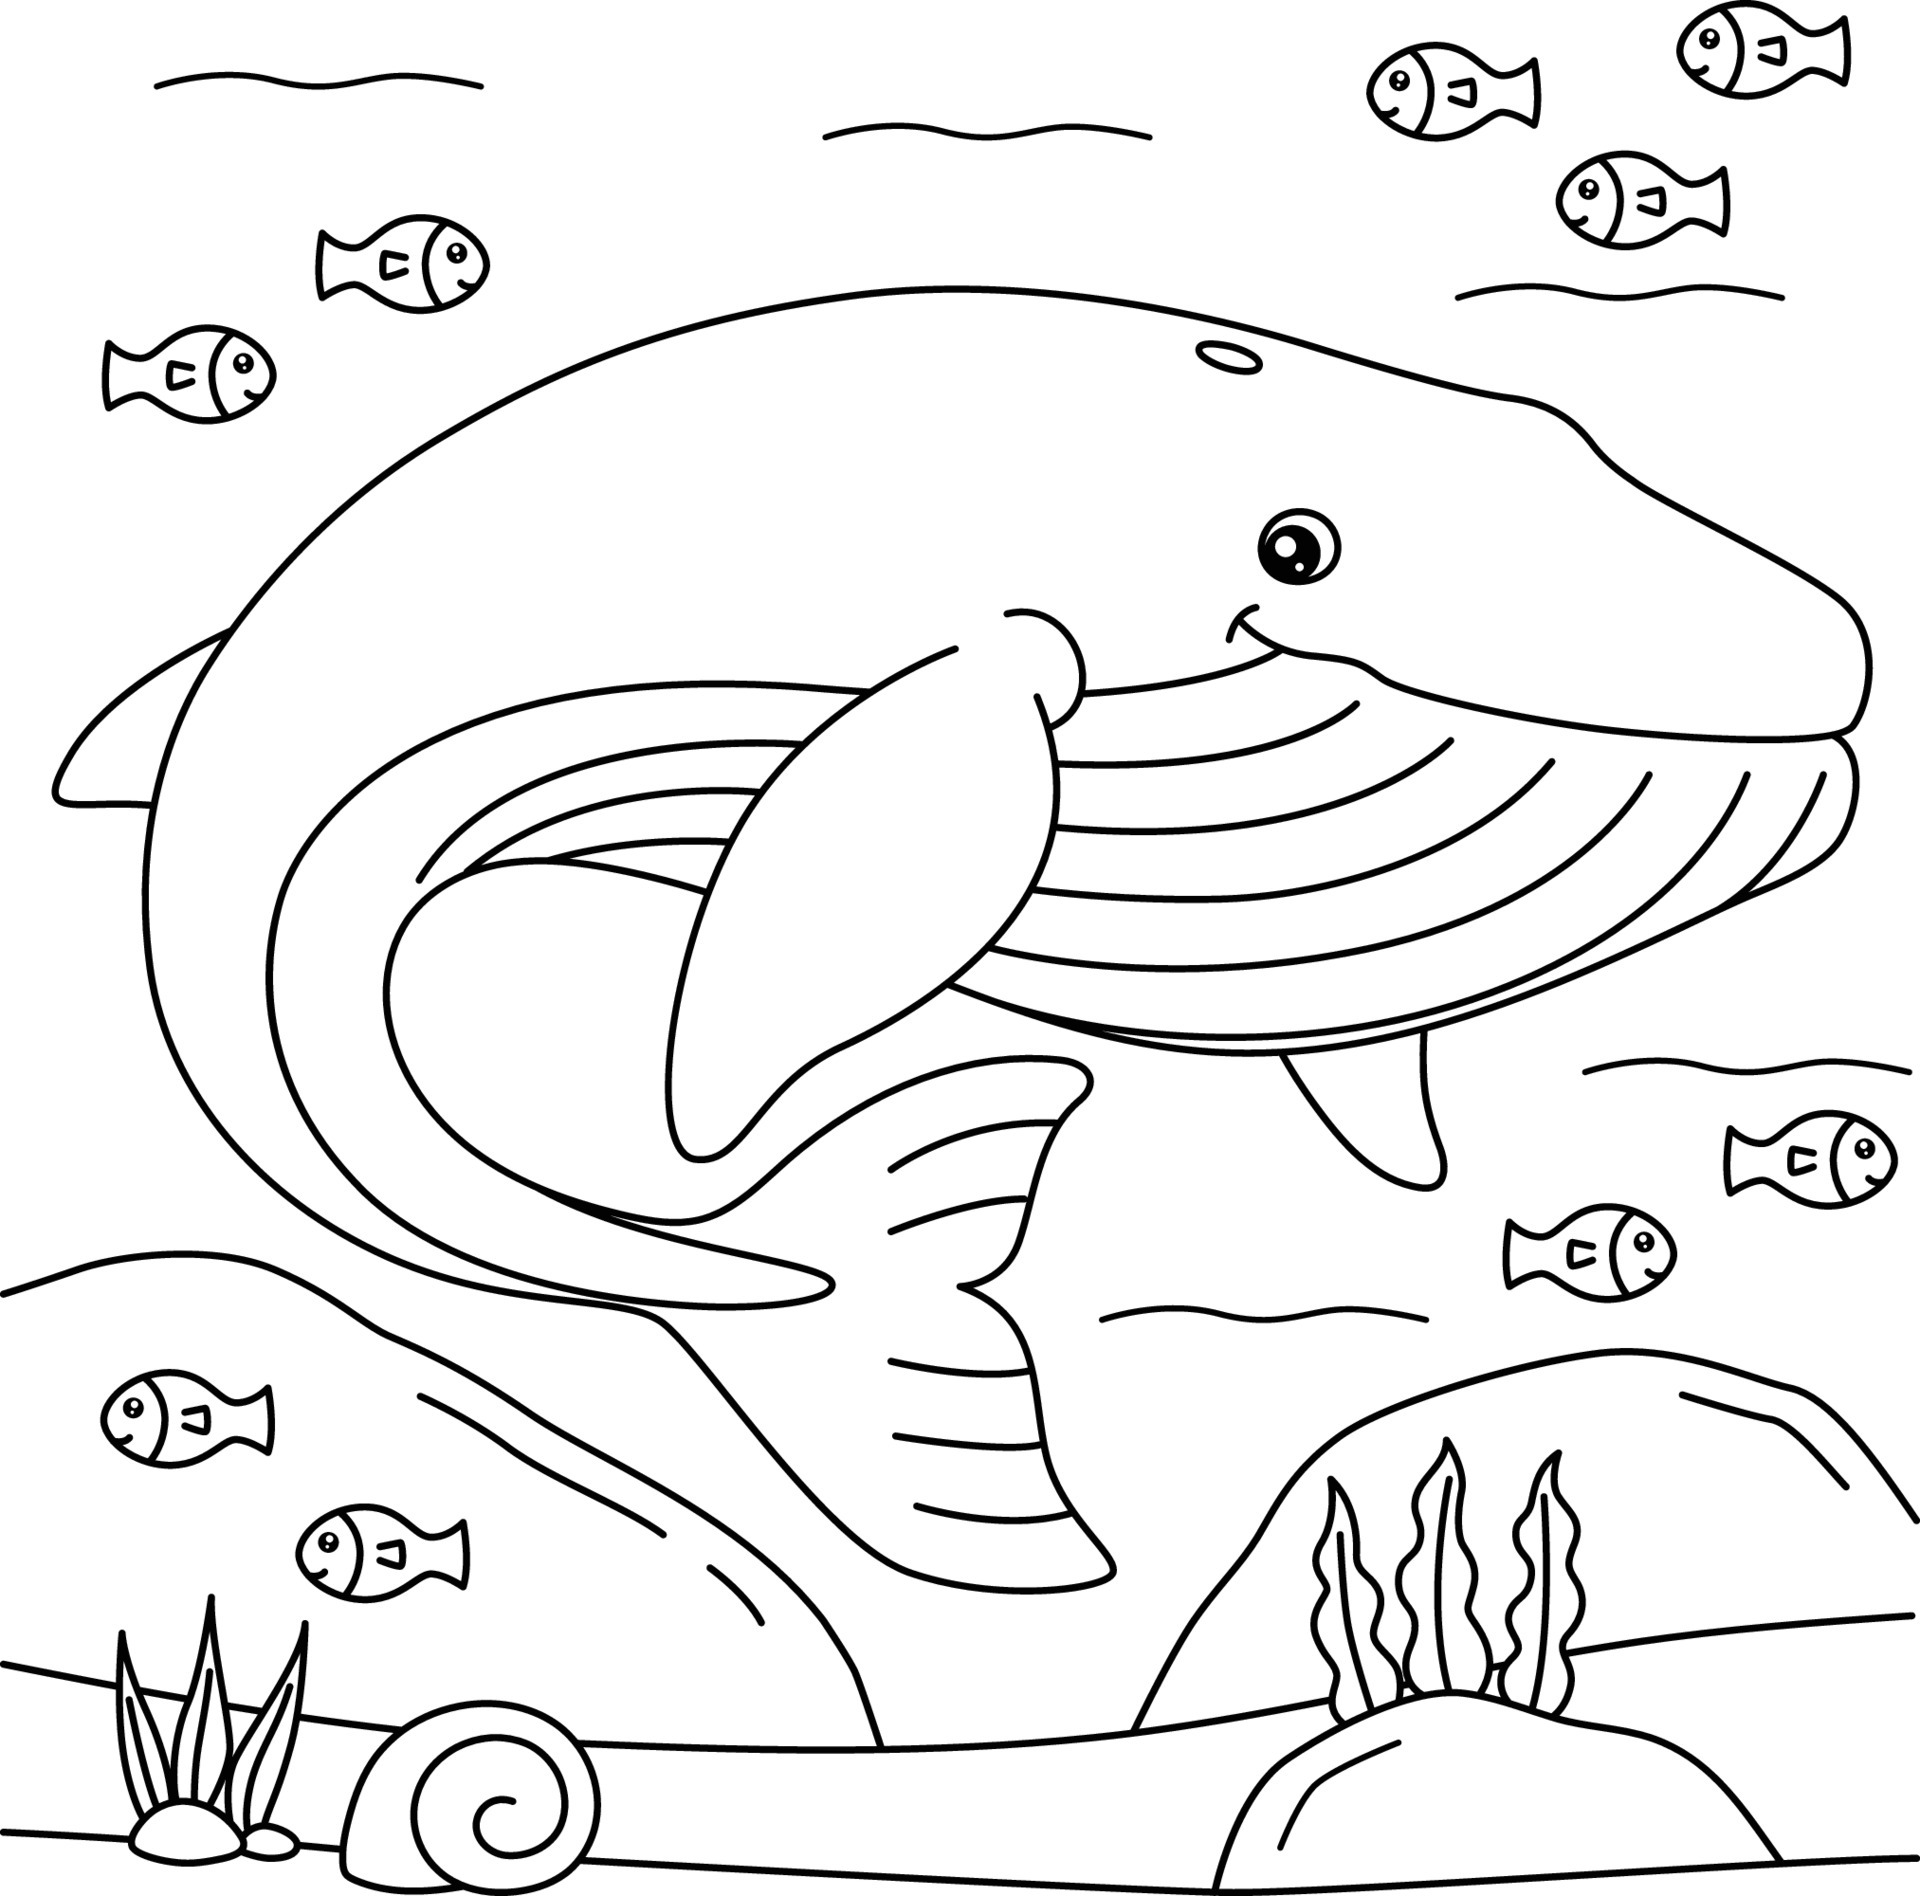 Drawing lesson for kids how to draw whale Vector Image